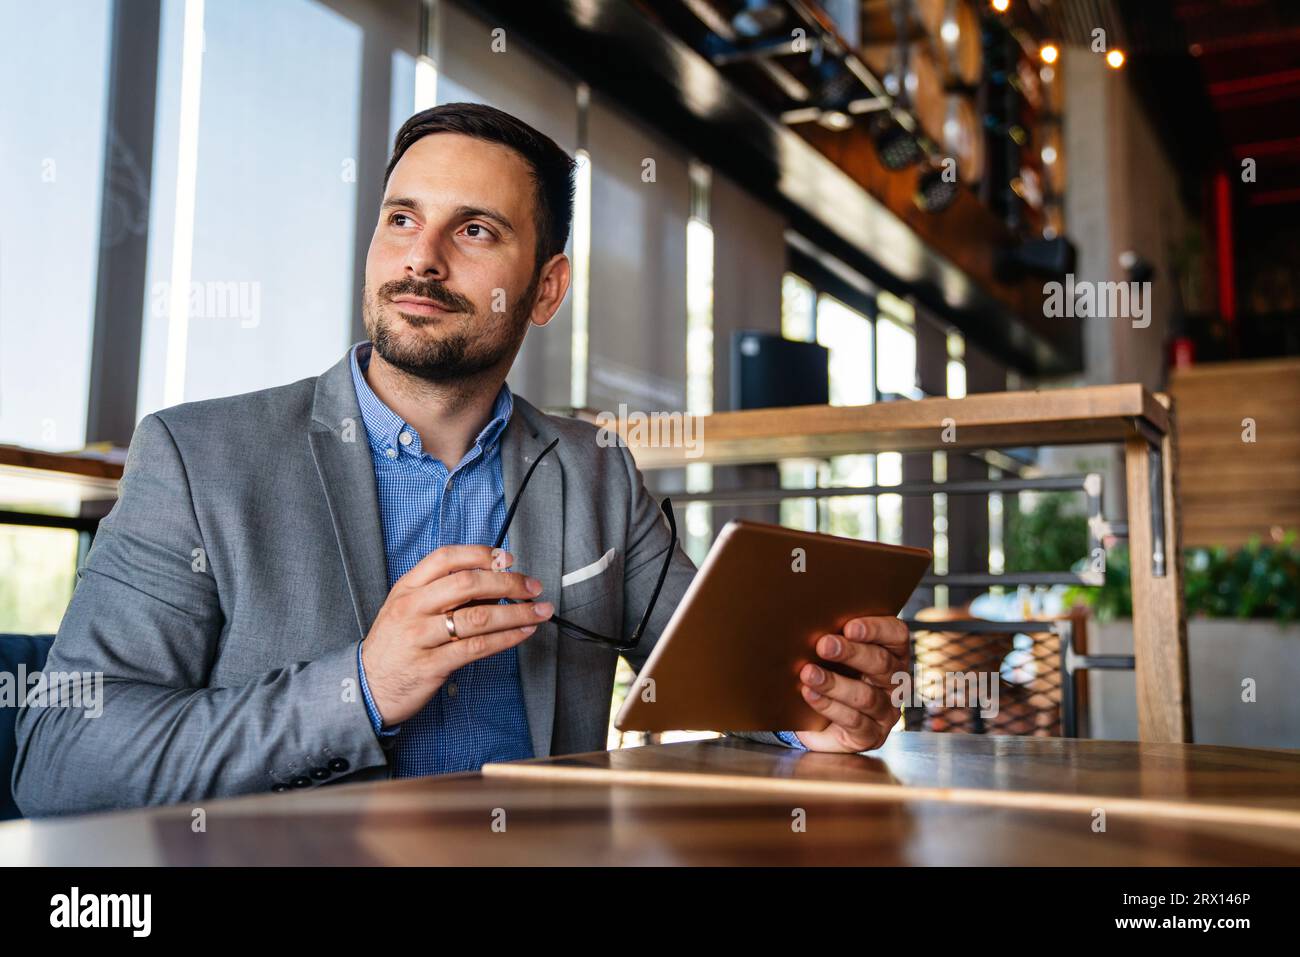 Portrait of happy succeffsul young business man, leader, ceo, manager using digital tablet to work. Stock Photo